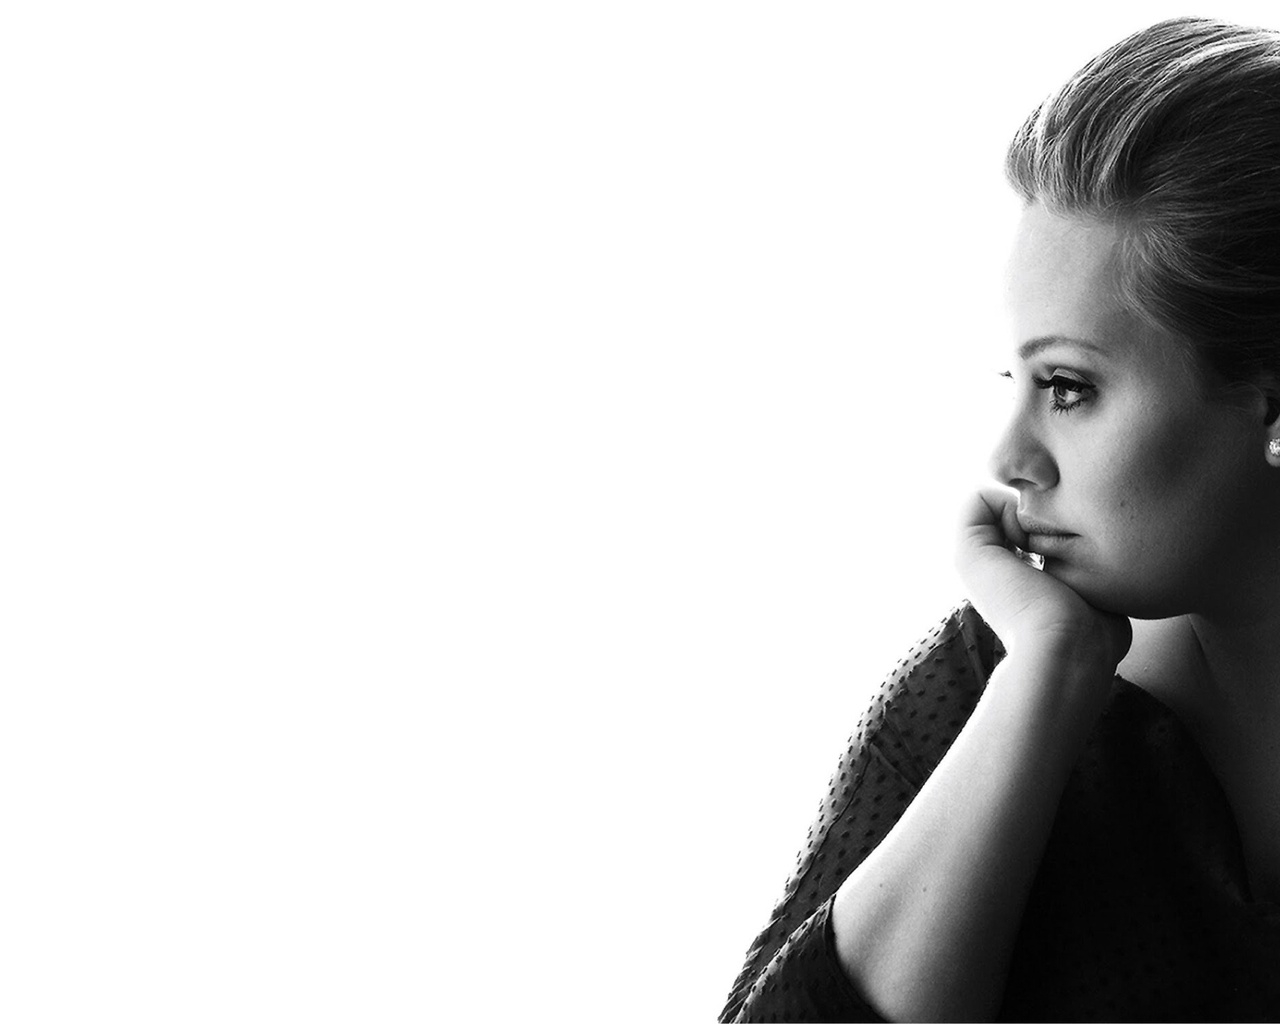 Adele Black and White for 1280 x 1024 resolution